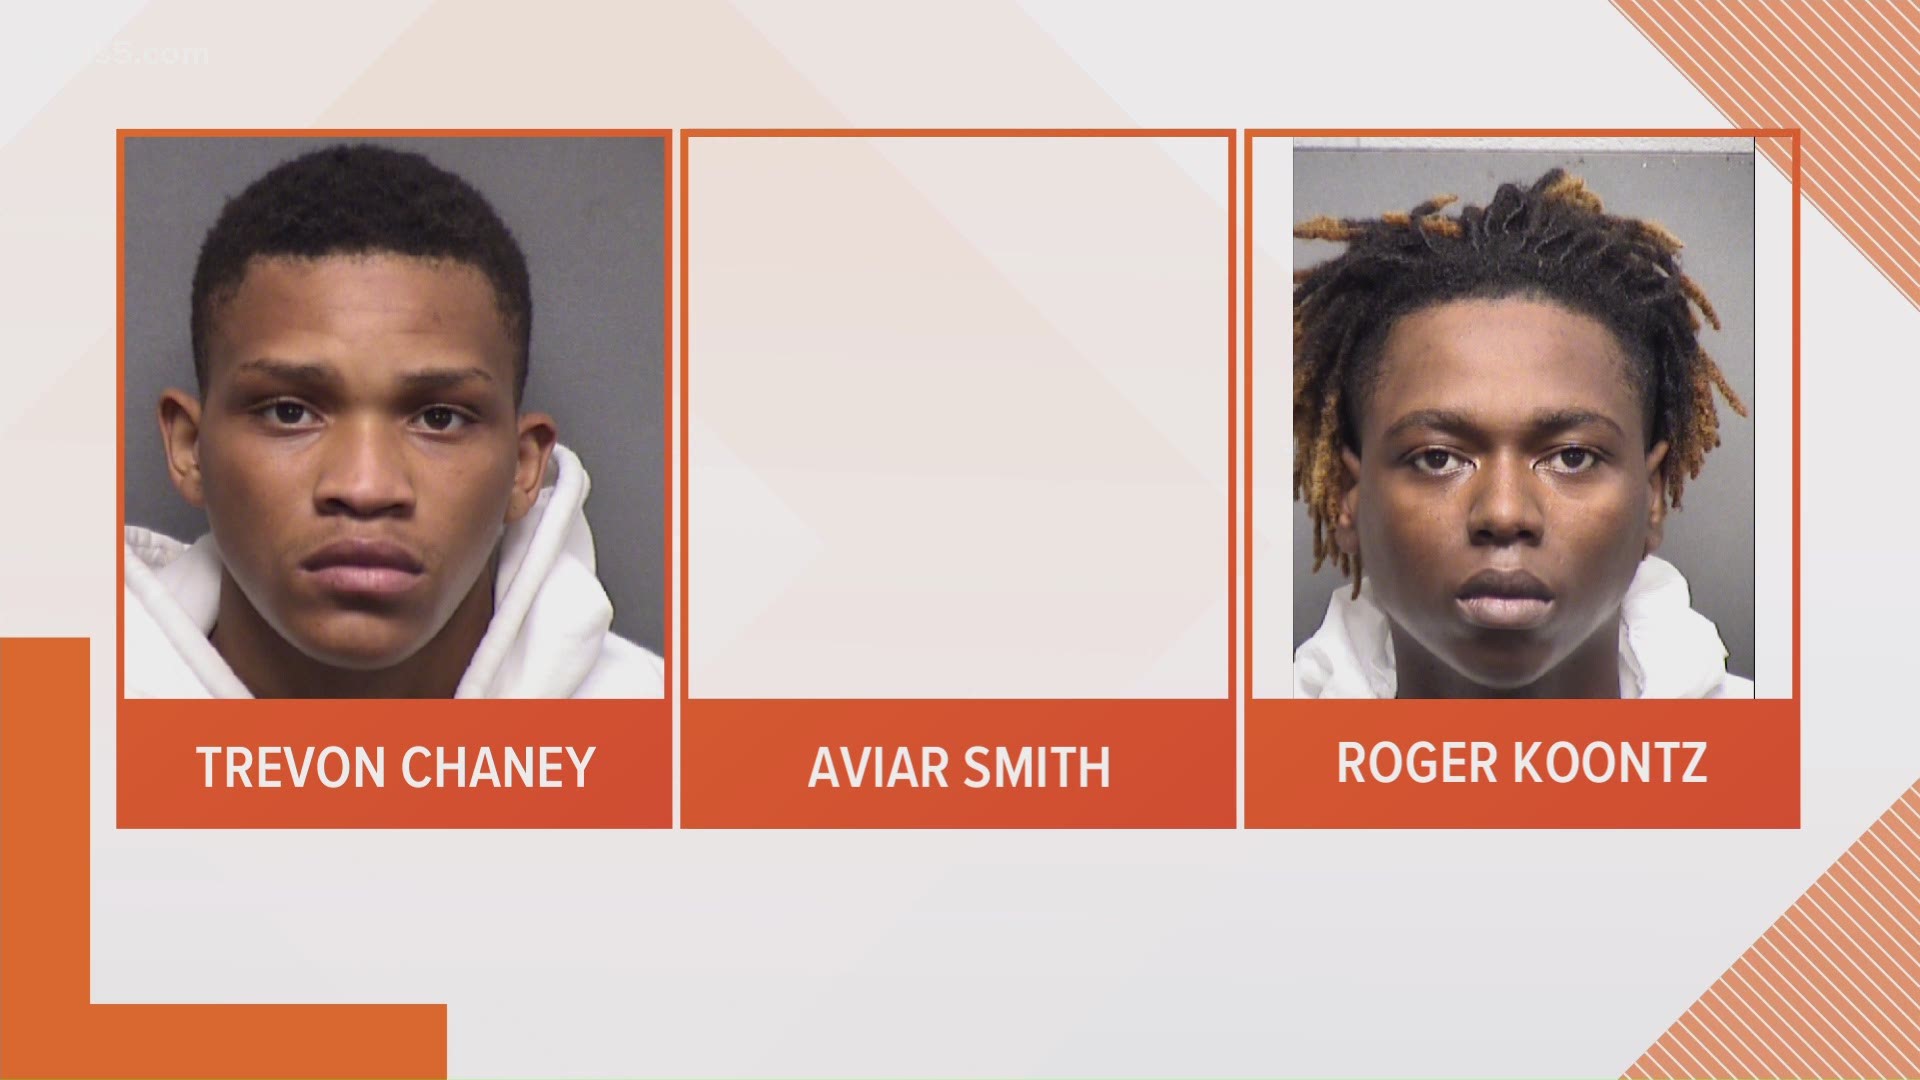 San Antonio police say Trevon Chaney (18), Aviar Smith (18), and Roger Koontz (19) attempted to rob 20-year-old Miguel Carvajal during a drug deal.